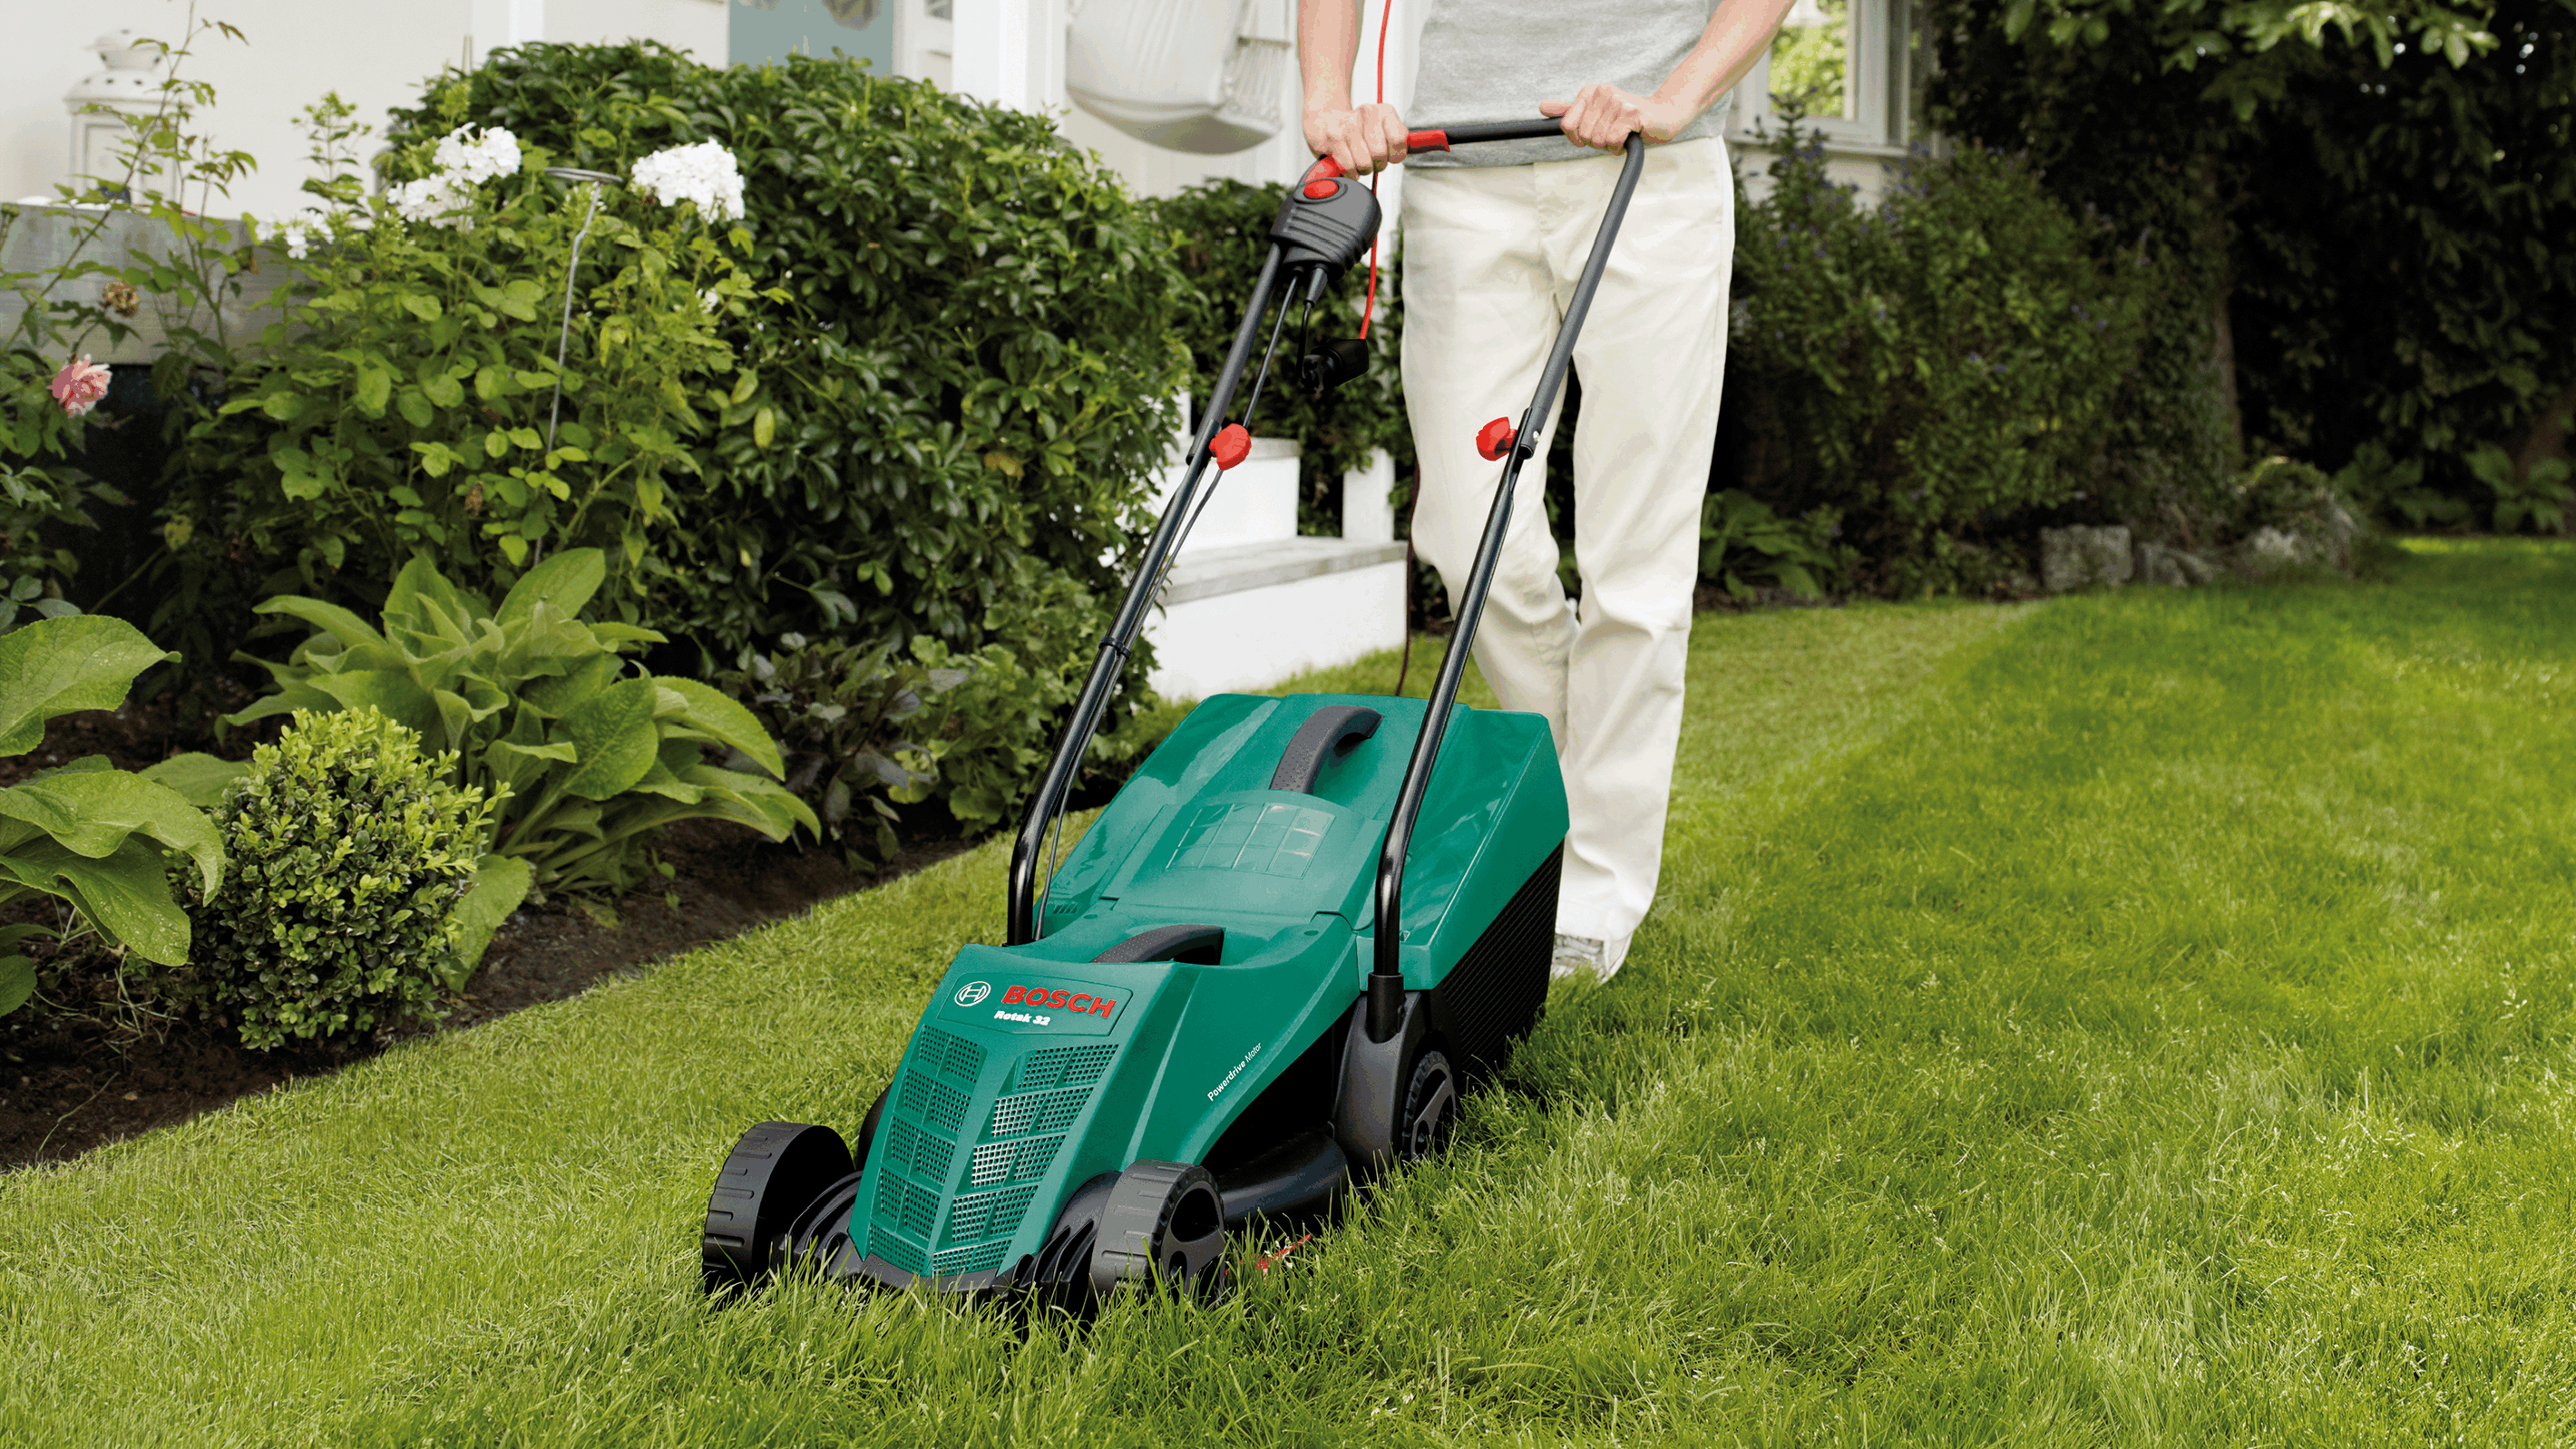 The Best Small Lawn Mower Compact Lawn Mowers Perfect For Small